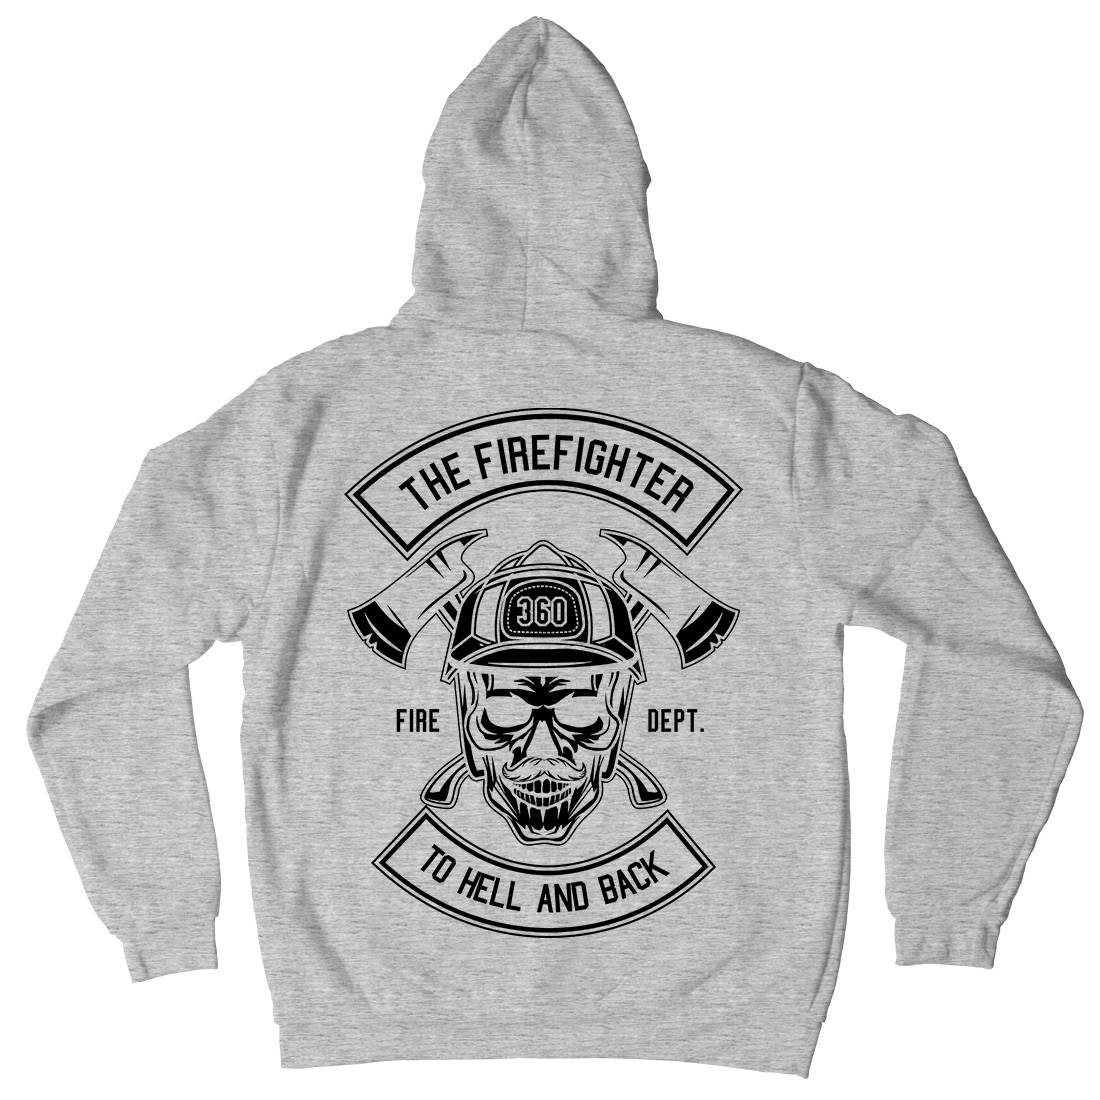 The Fire Fighter Kids Crew Neck Hoodie Firefighters B651